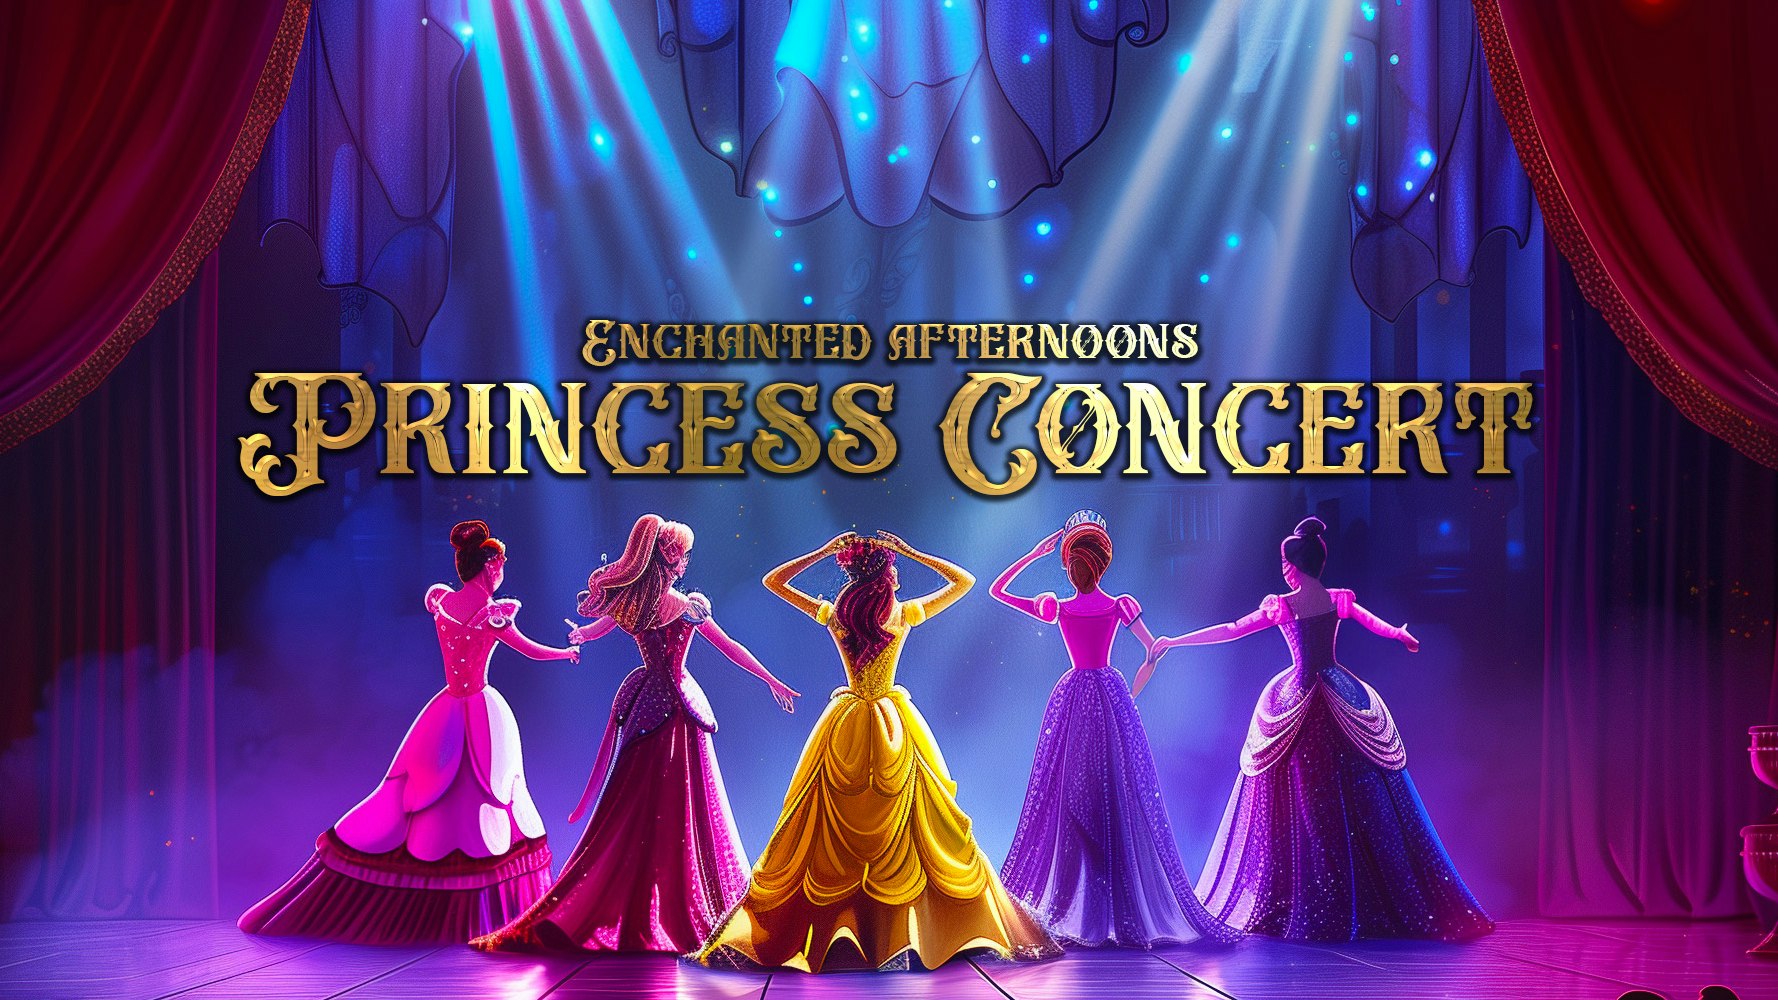 👑✨The Princess Concert Comes To Derry✨👑